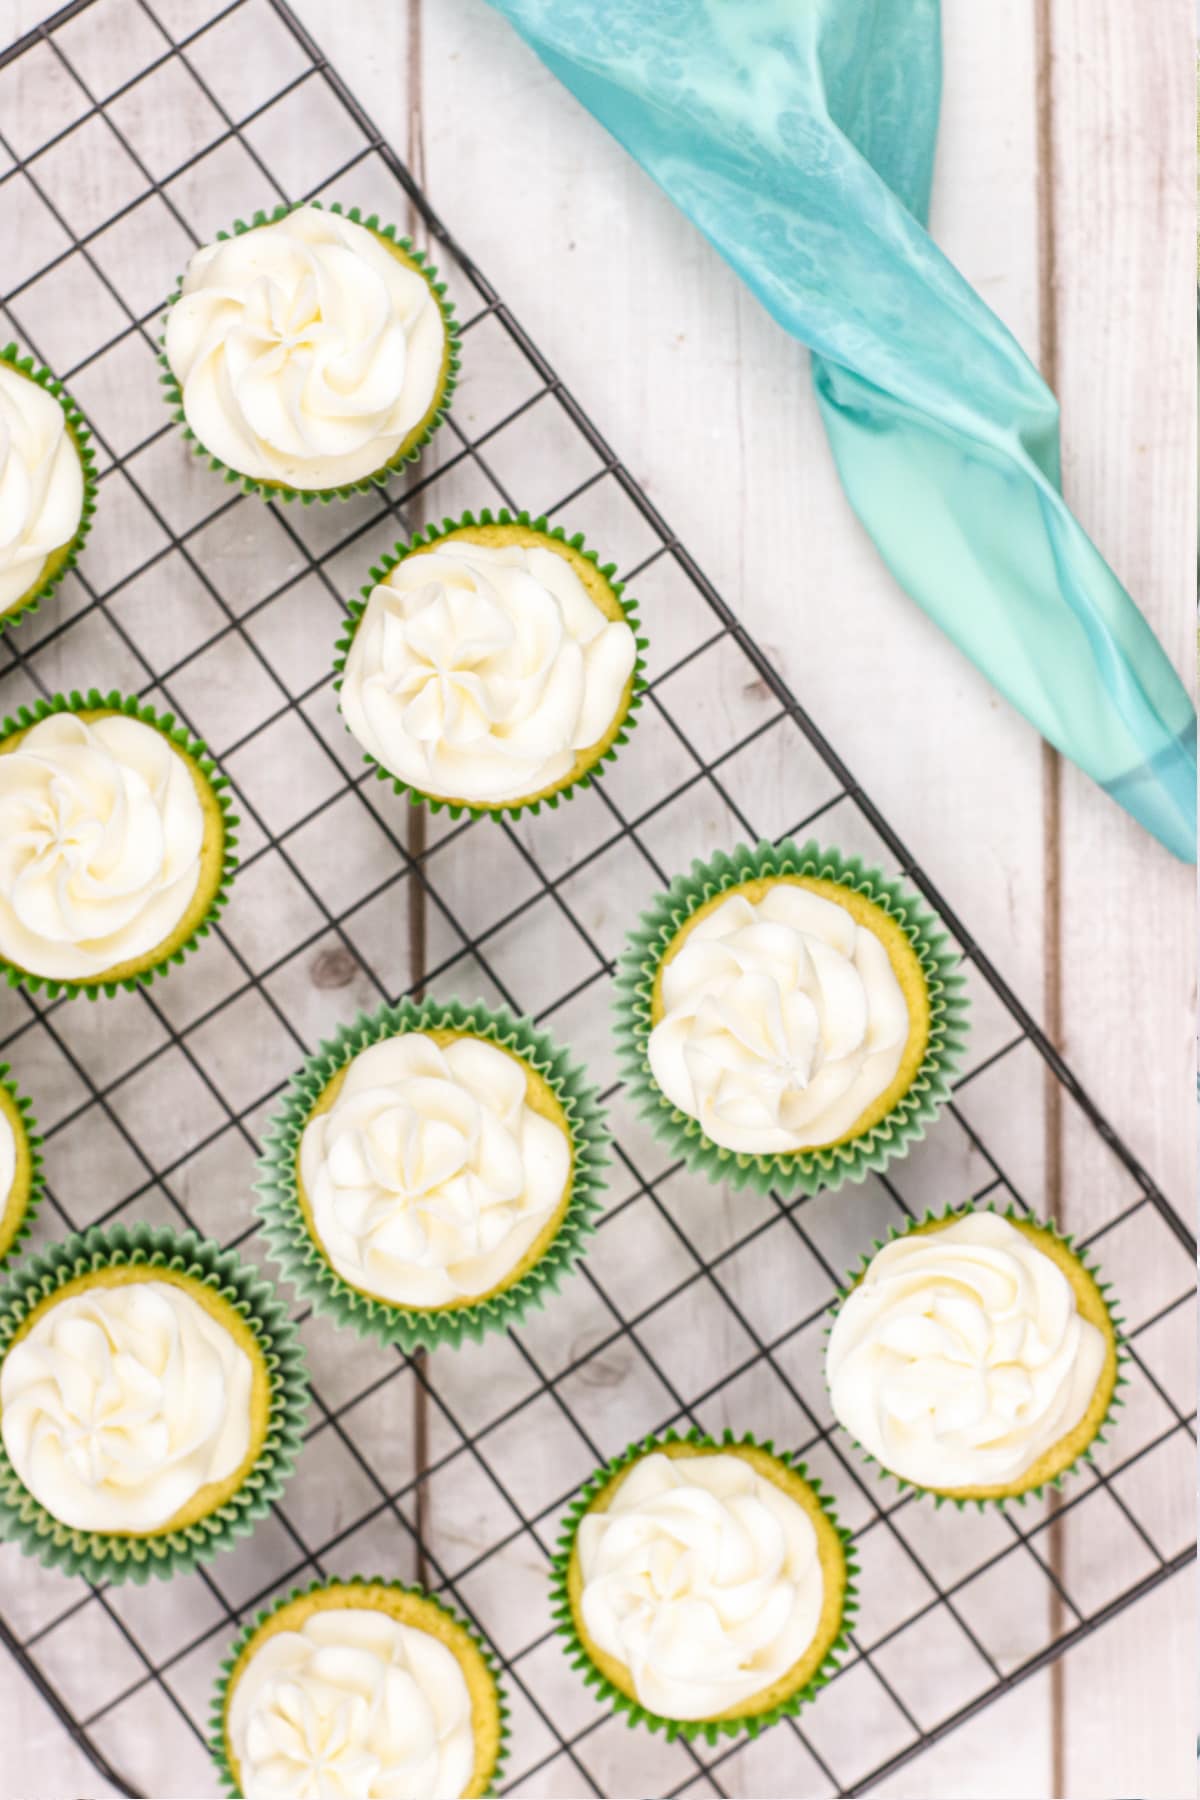 Piping bag and frosted cupcakes